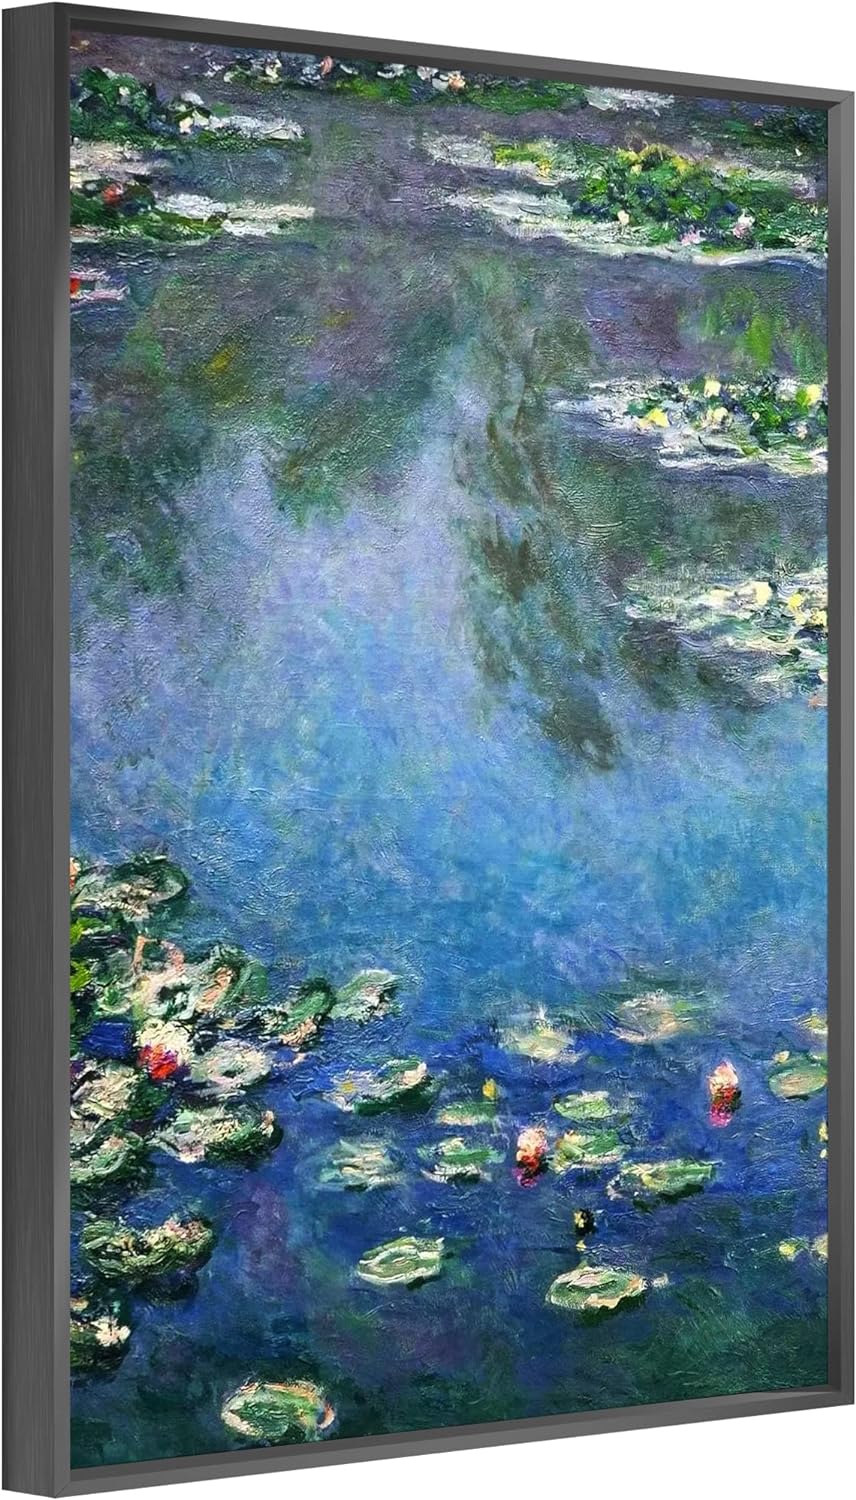 jenesaisquoi Framed Canvas Wall Art, Water Lilies Claude Monet Art Prints, Claude Monet Artwork Famous Art Oil Paintings Ready To Hang for Living Room, Bedroom, Office (Black Frame, 12 x 16)